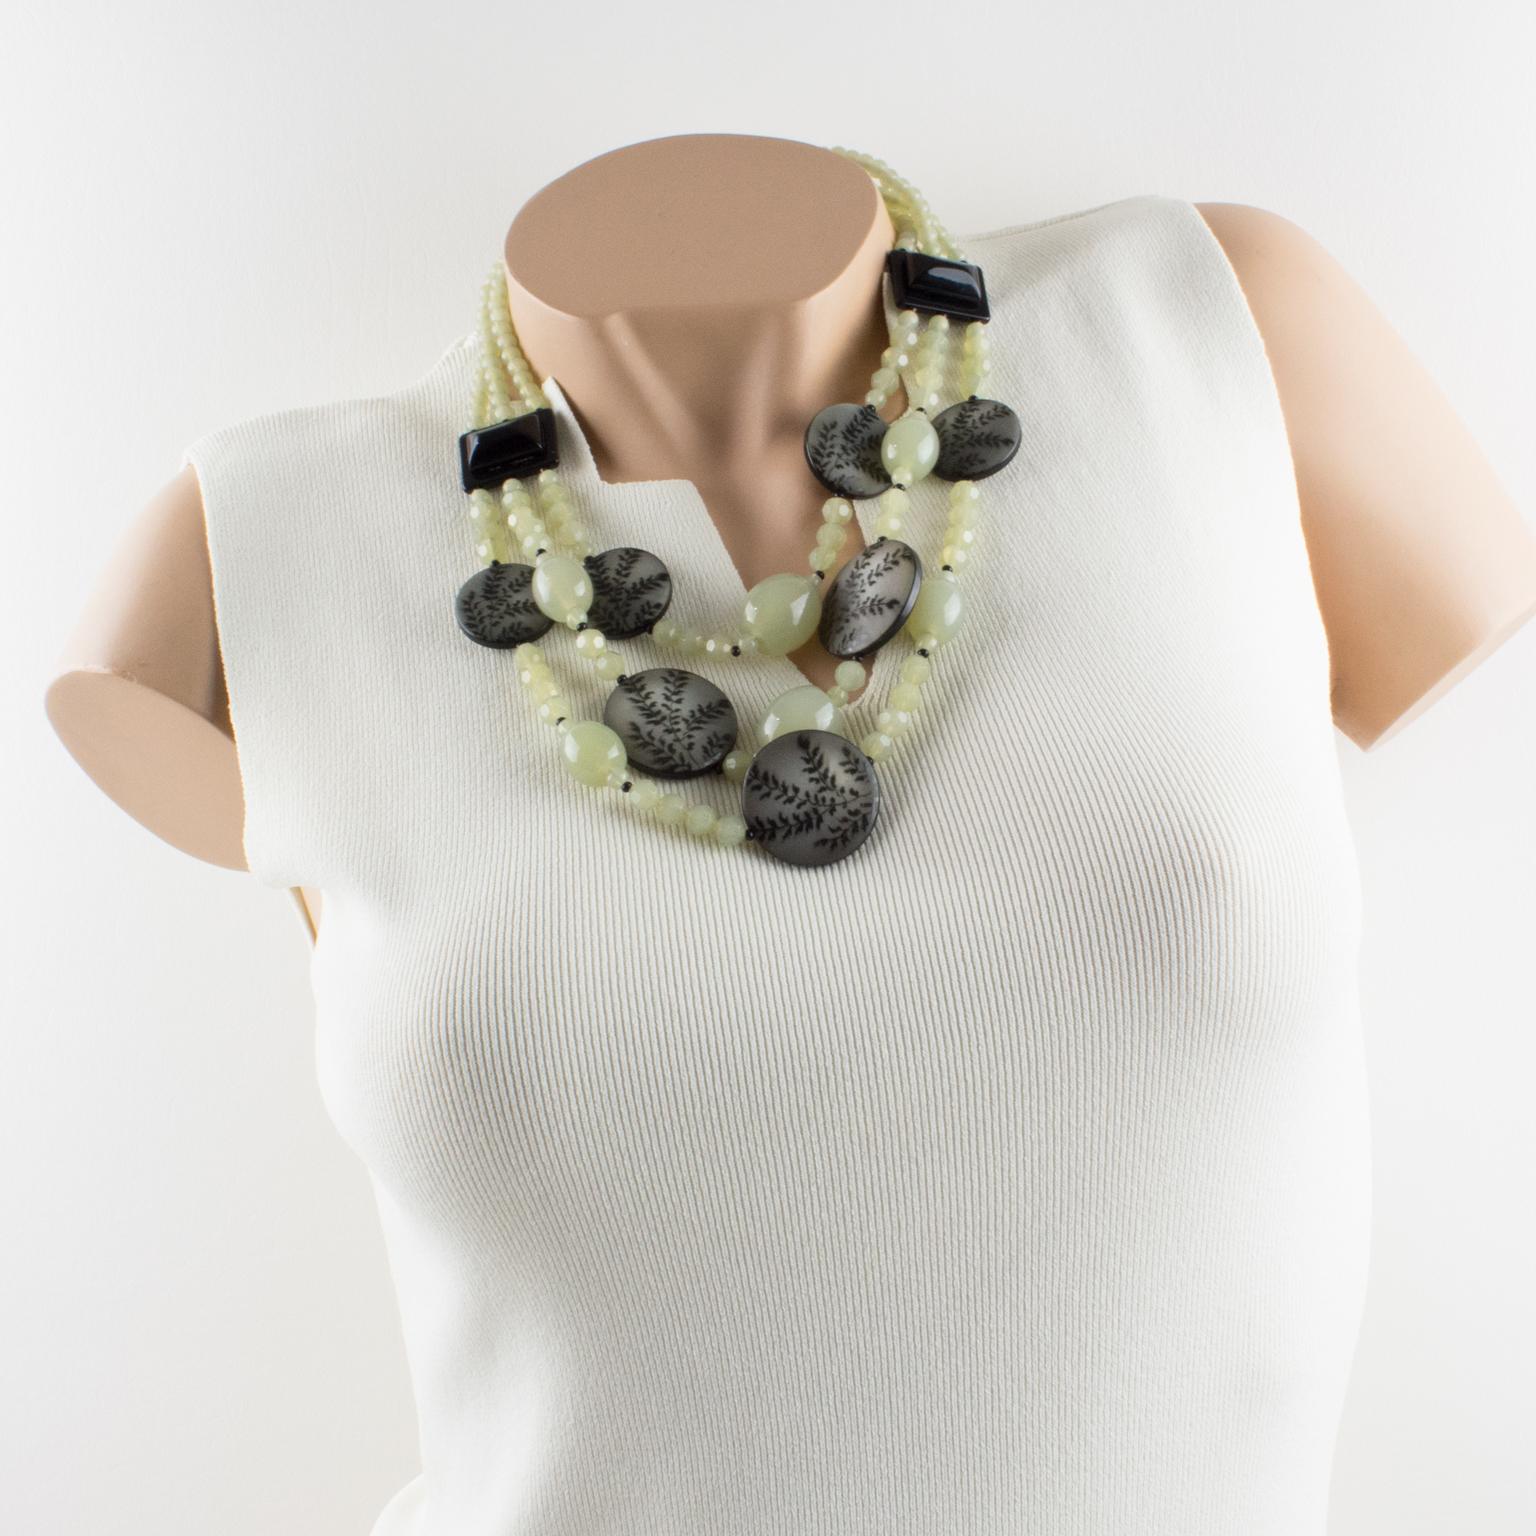 Refined Angela Caputi, made in Italy multi-strand cascading beaded choker necklace. Resin beads with three strands. Assorted color range with black and aqua green. The black dimensional disks have floral design engraving that worked like a photo